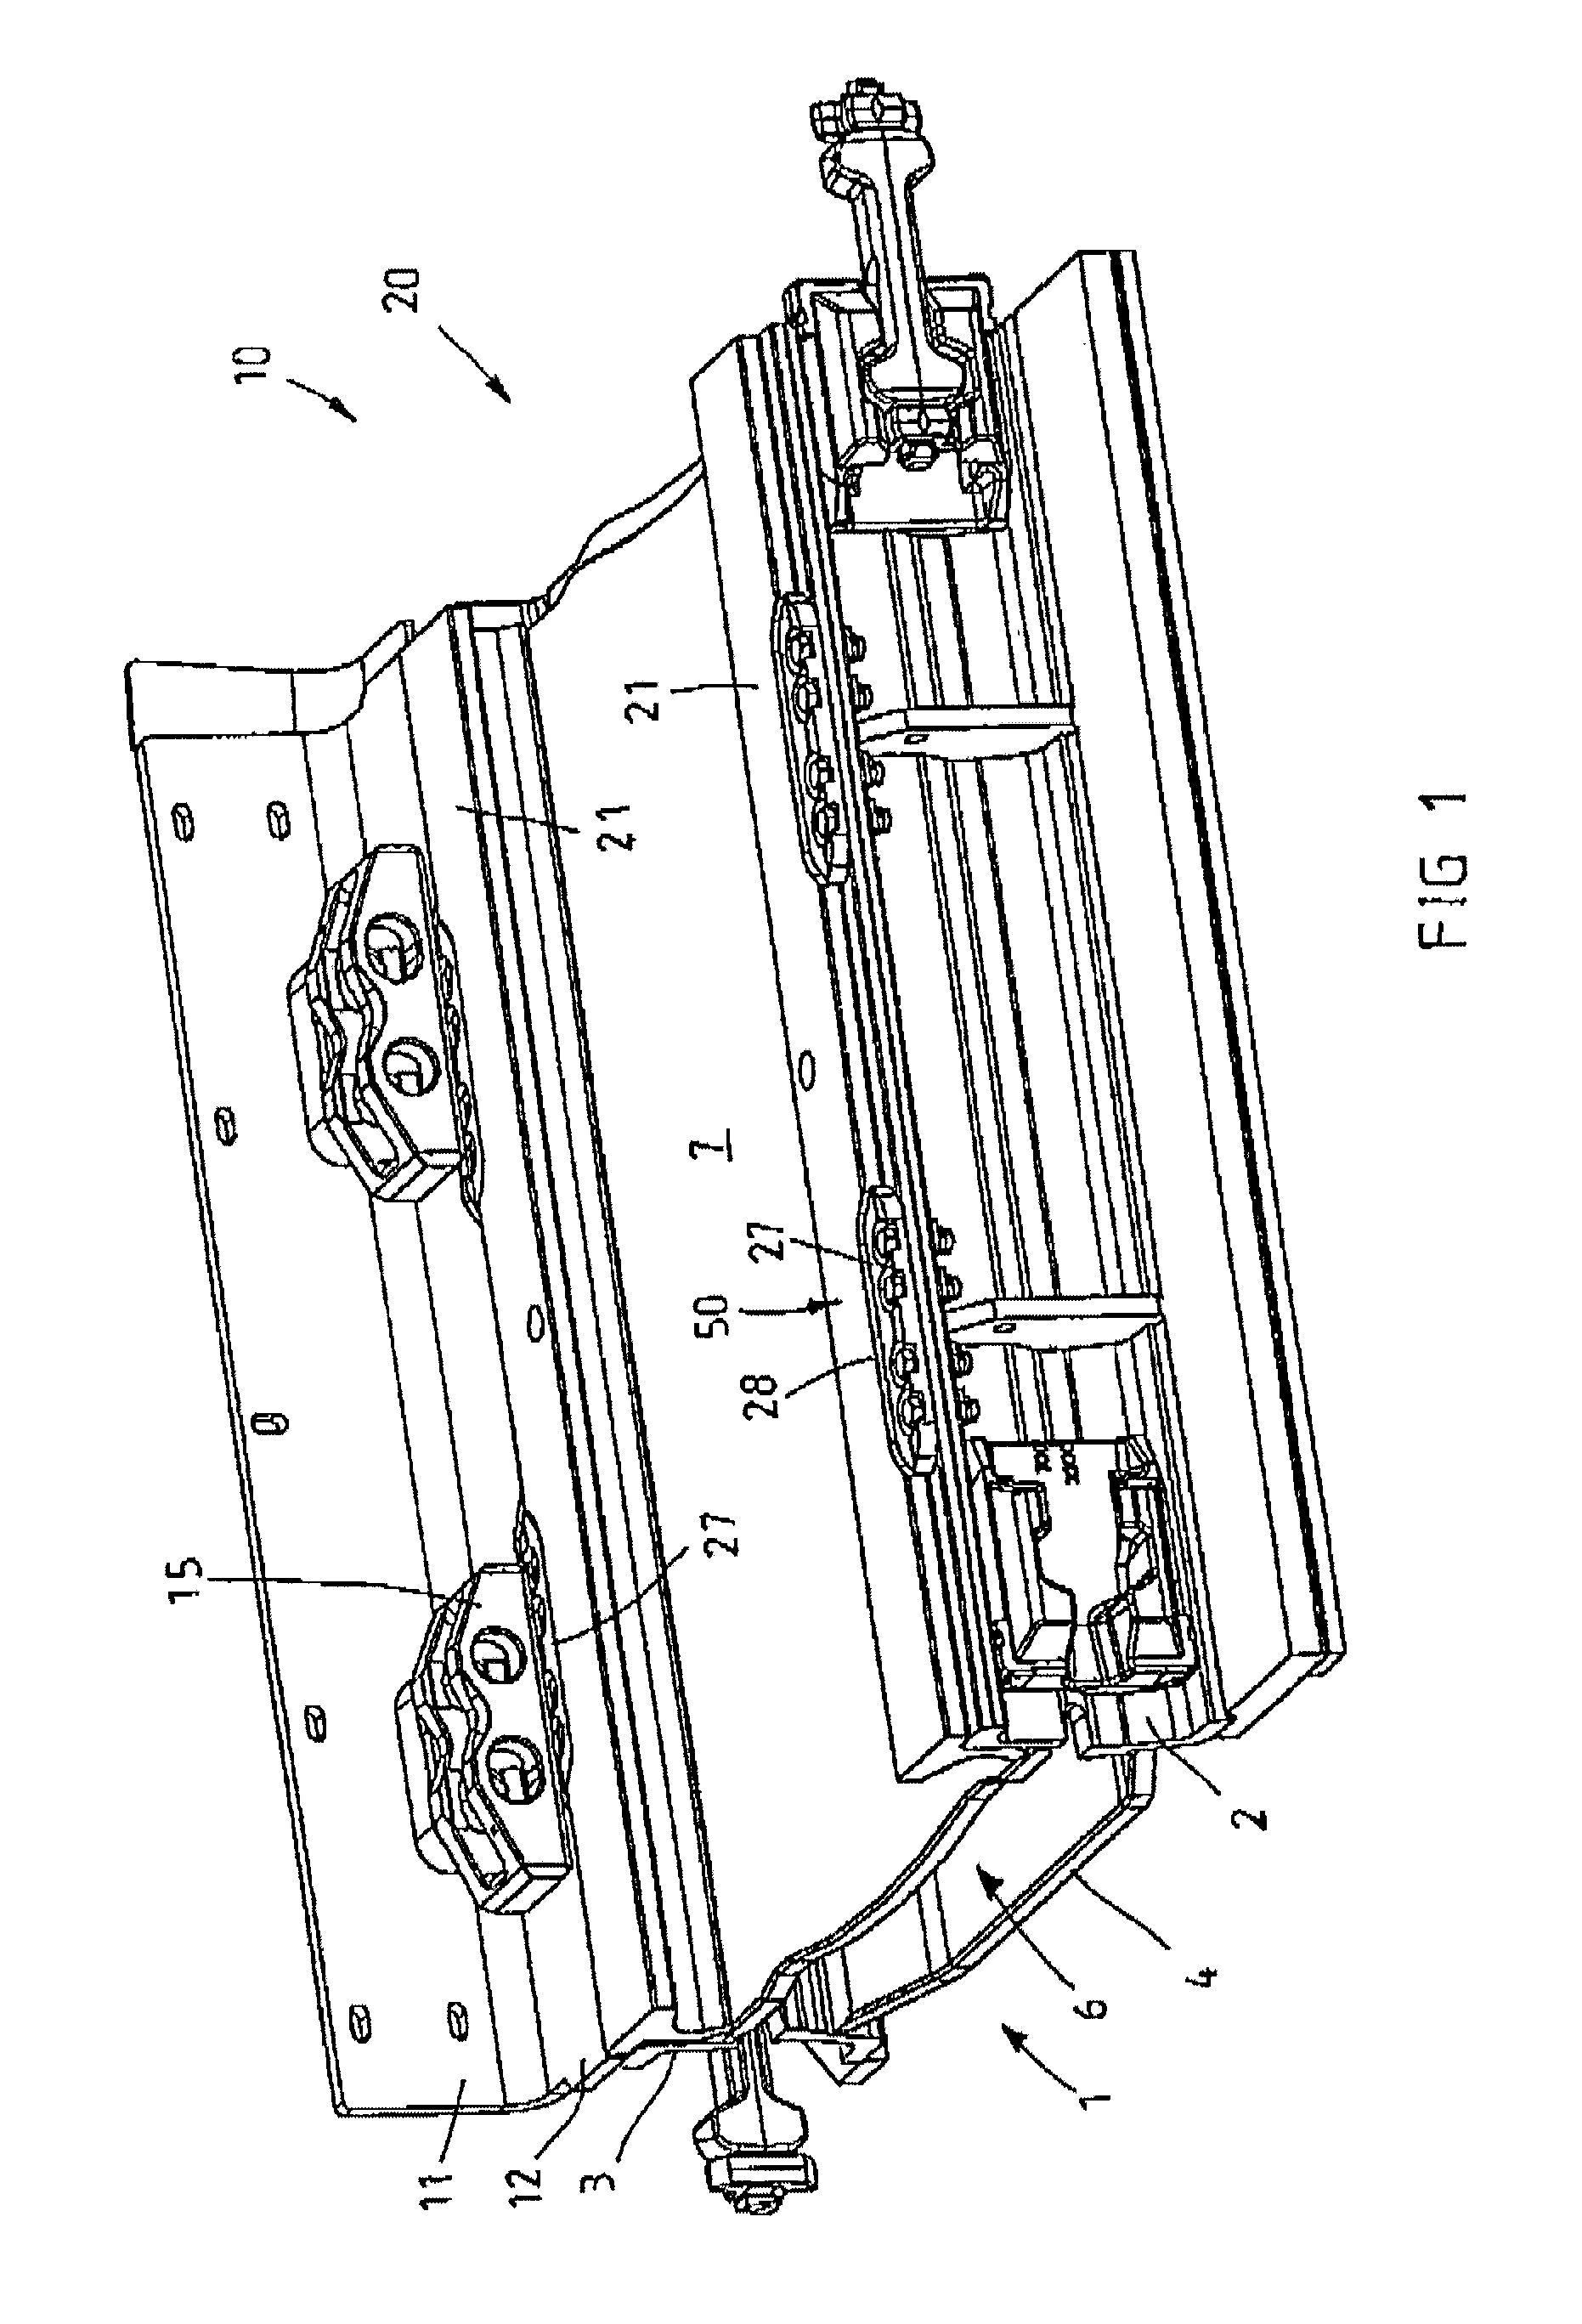 Conveyor pan with changeable trough, and a changeable trough